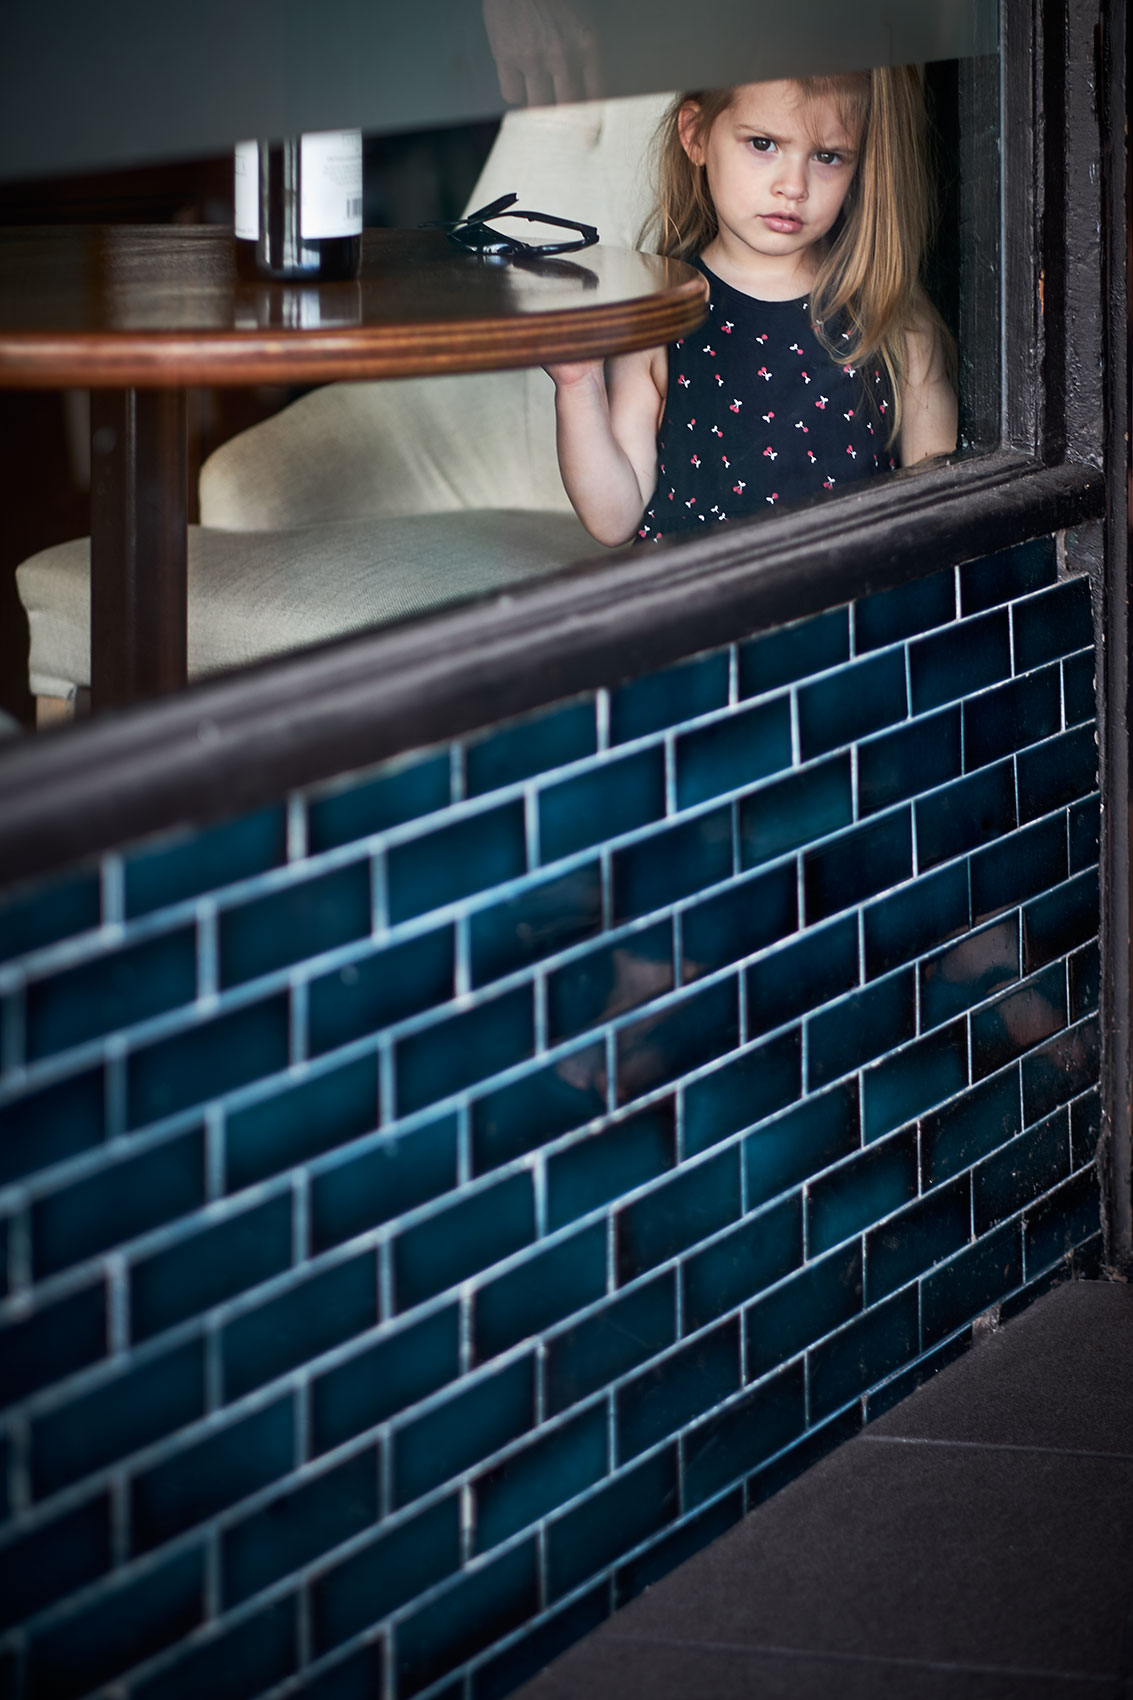 Behind Closed Doors • Girl in Restaurant Window • Lifestyle & Portrait Photography